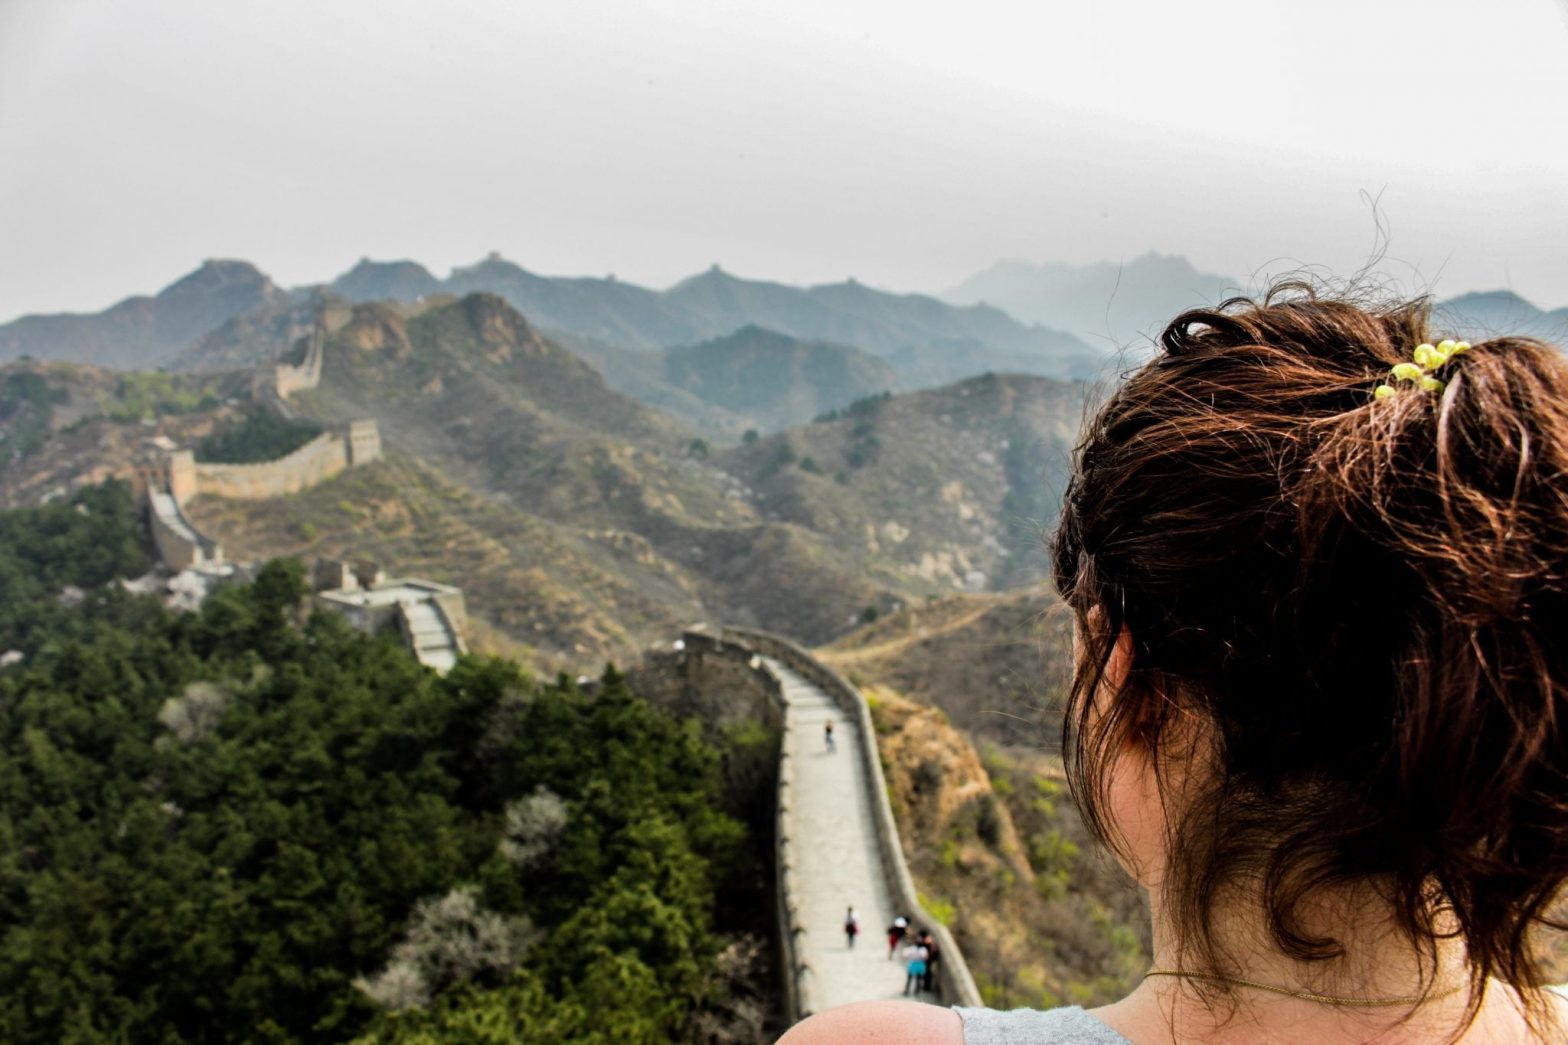 Anna Meanders at the Great Wall of China